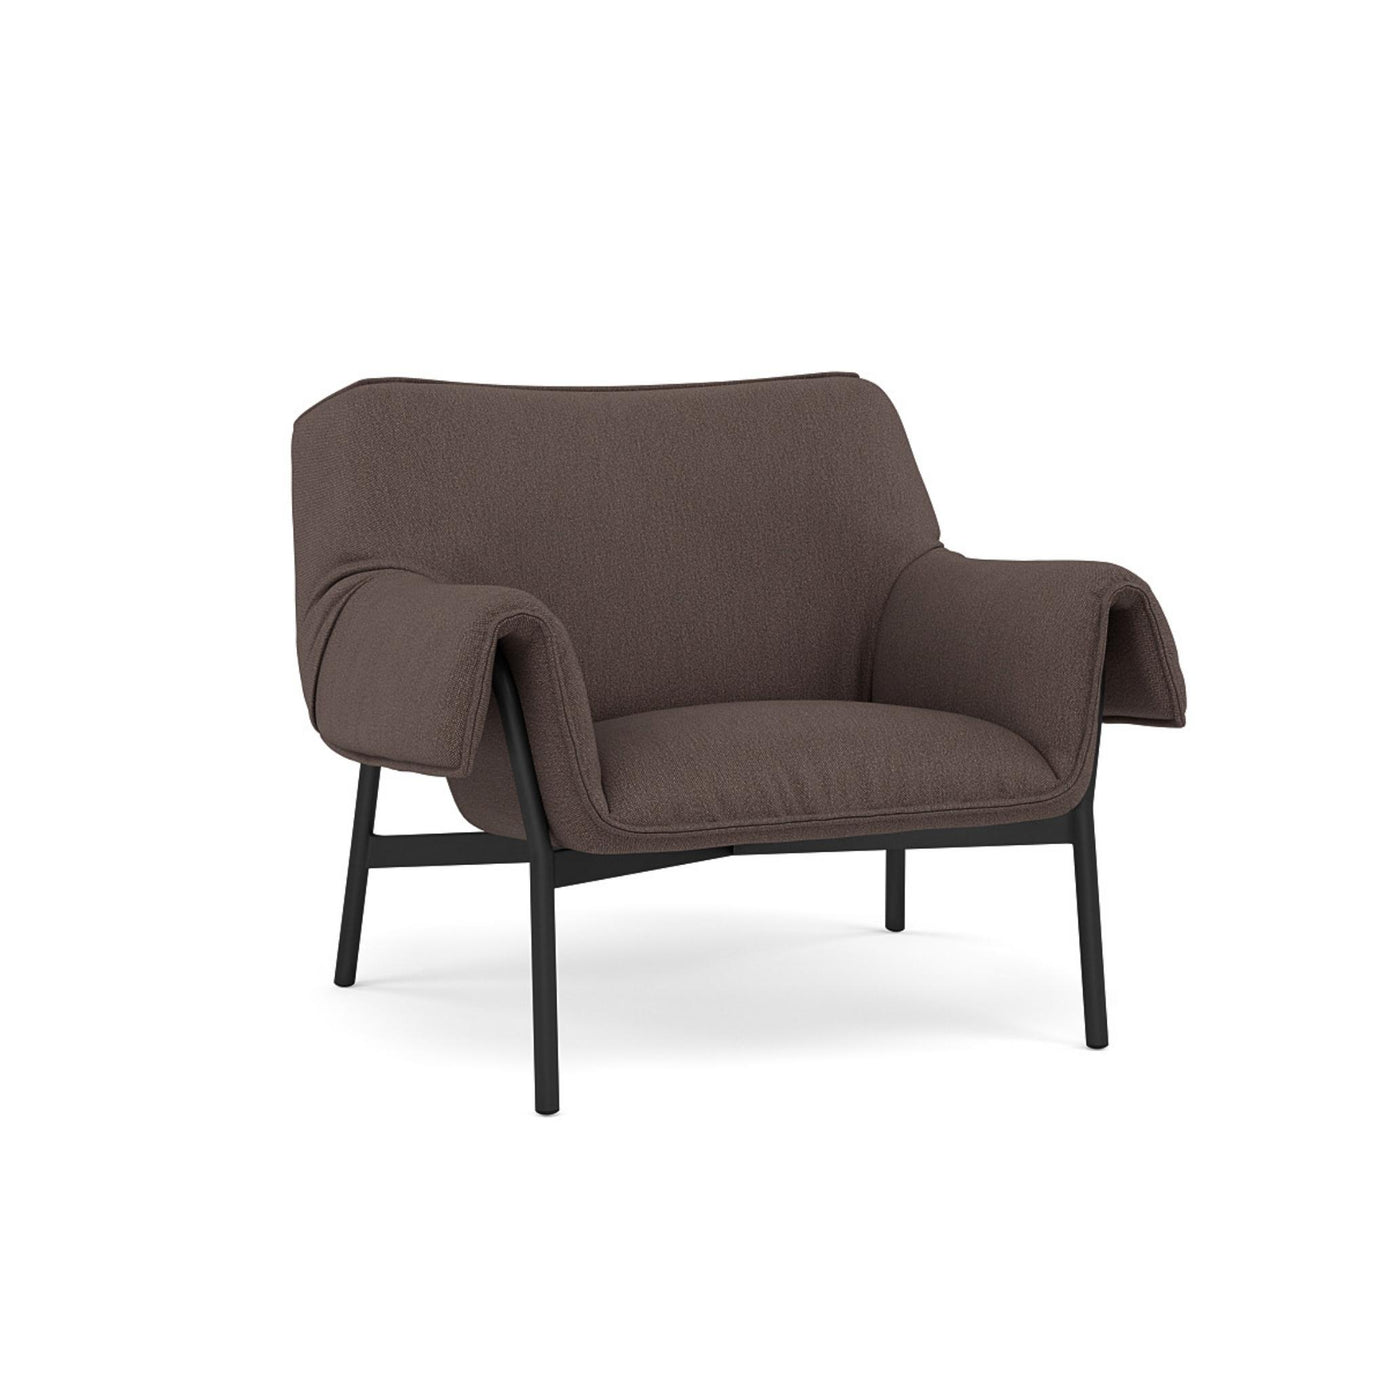 Muuto Wrap Lounge Chair. Made to order from someday designs. #colour_clay-6-red-brown